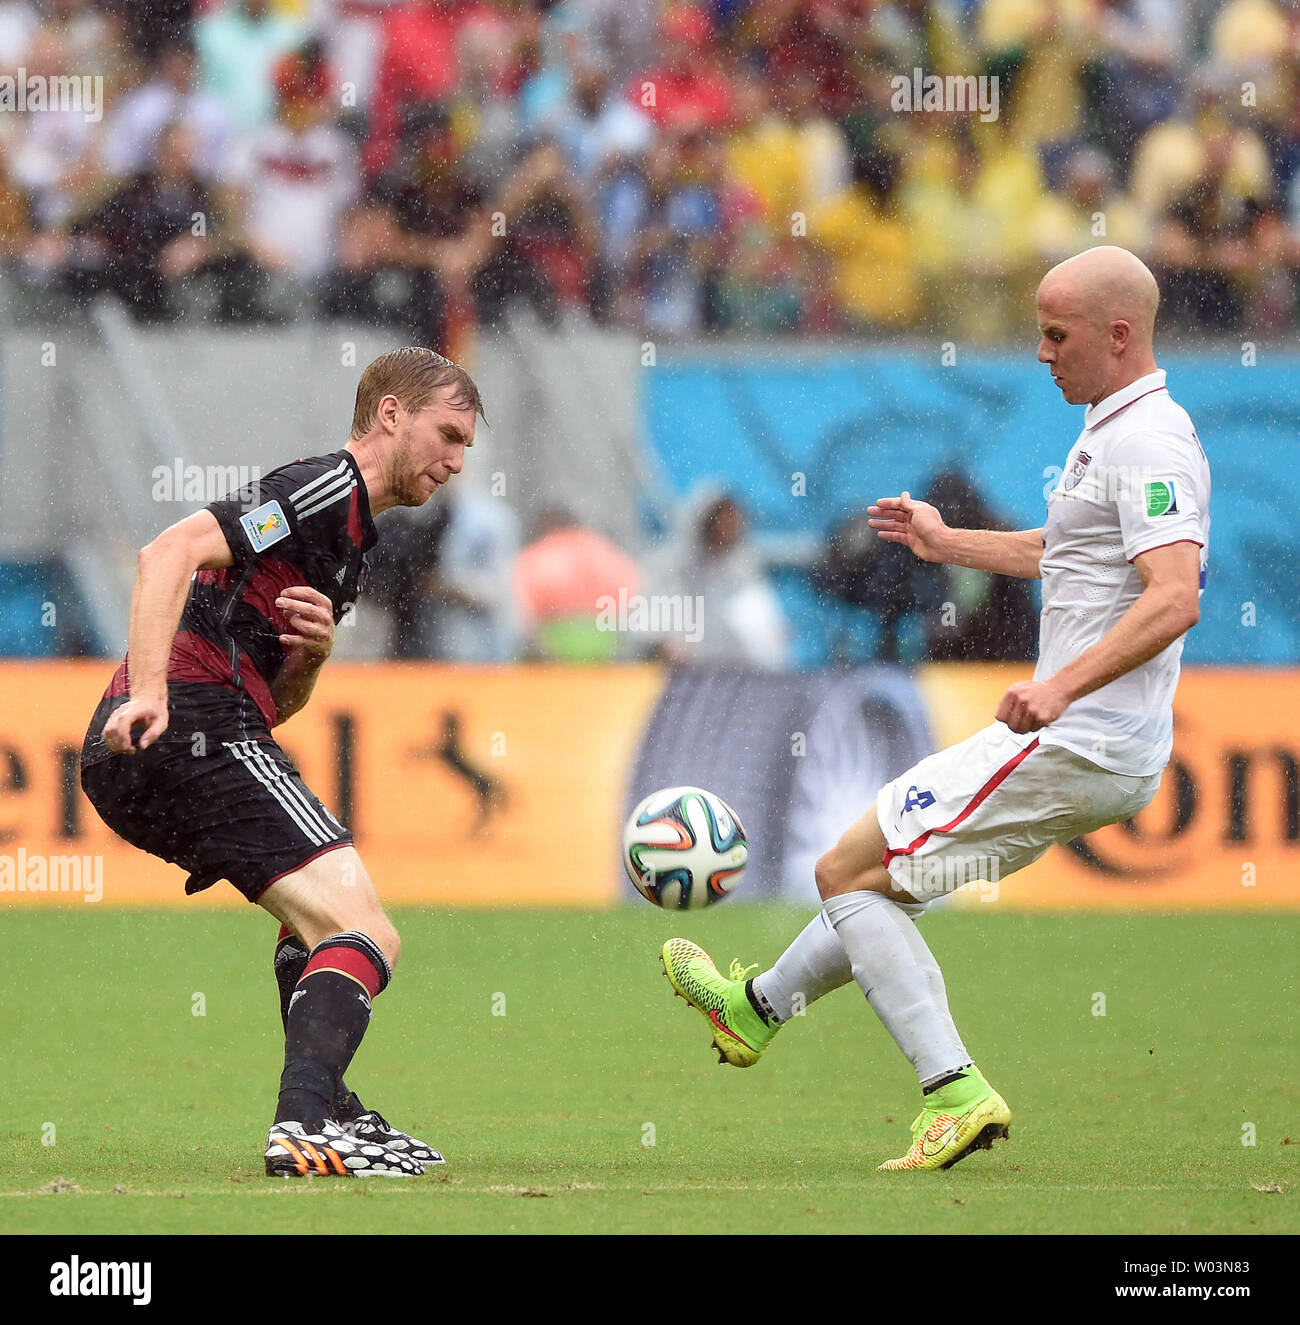 Michael Bradley of USA competes with Per Mertesacker (L) of Germany during the 2014 FIFA World Cup Group G match at the Arena Pernambuco in Recife, Brazil on June 26, 2014. UPI/Chris Brunskill Stock Photo